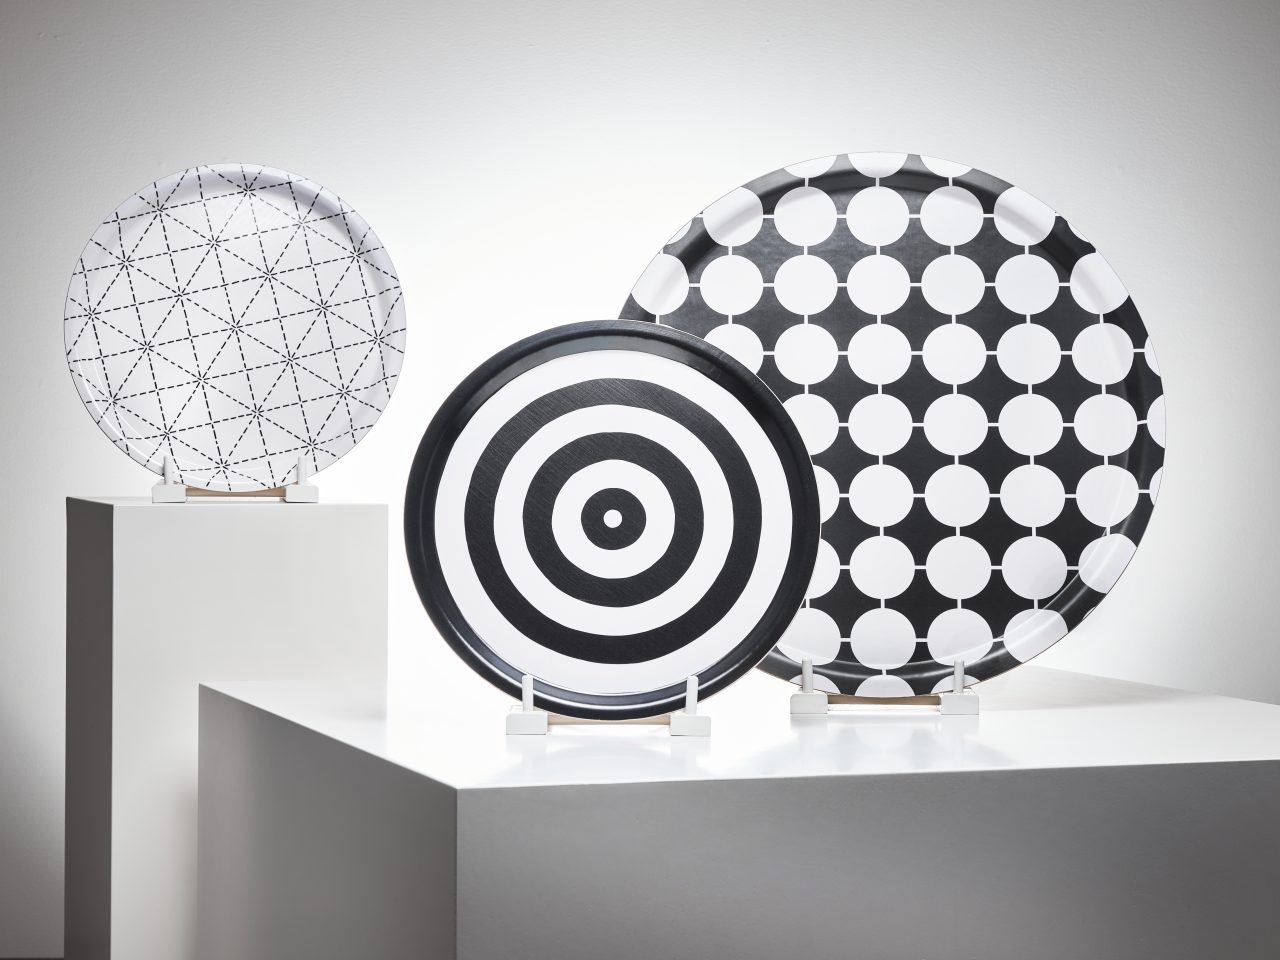 Black/white round trays in different sizes, with varying graphic patterns.